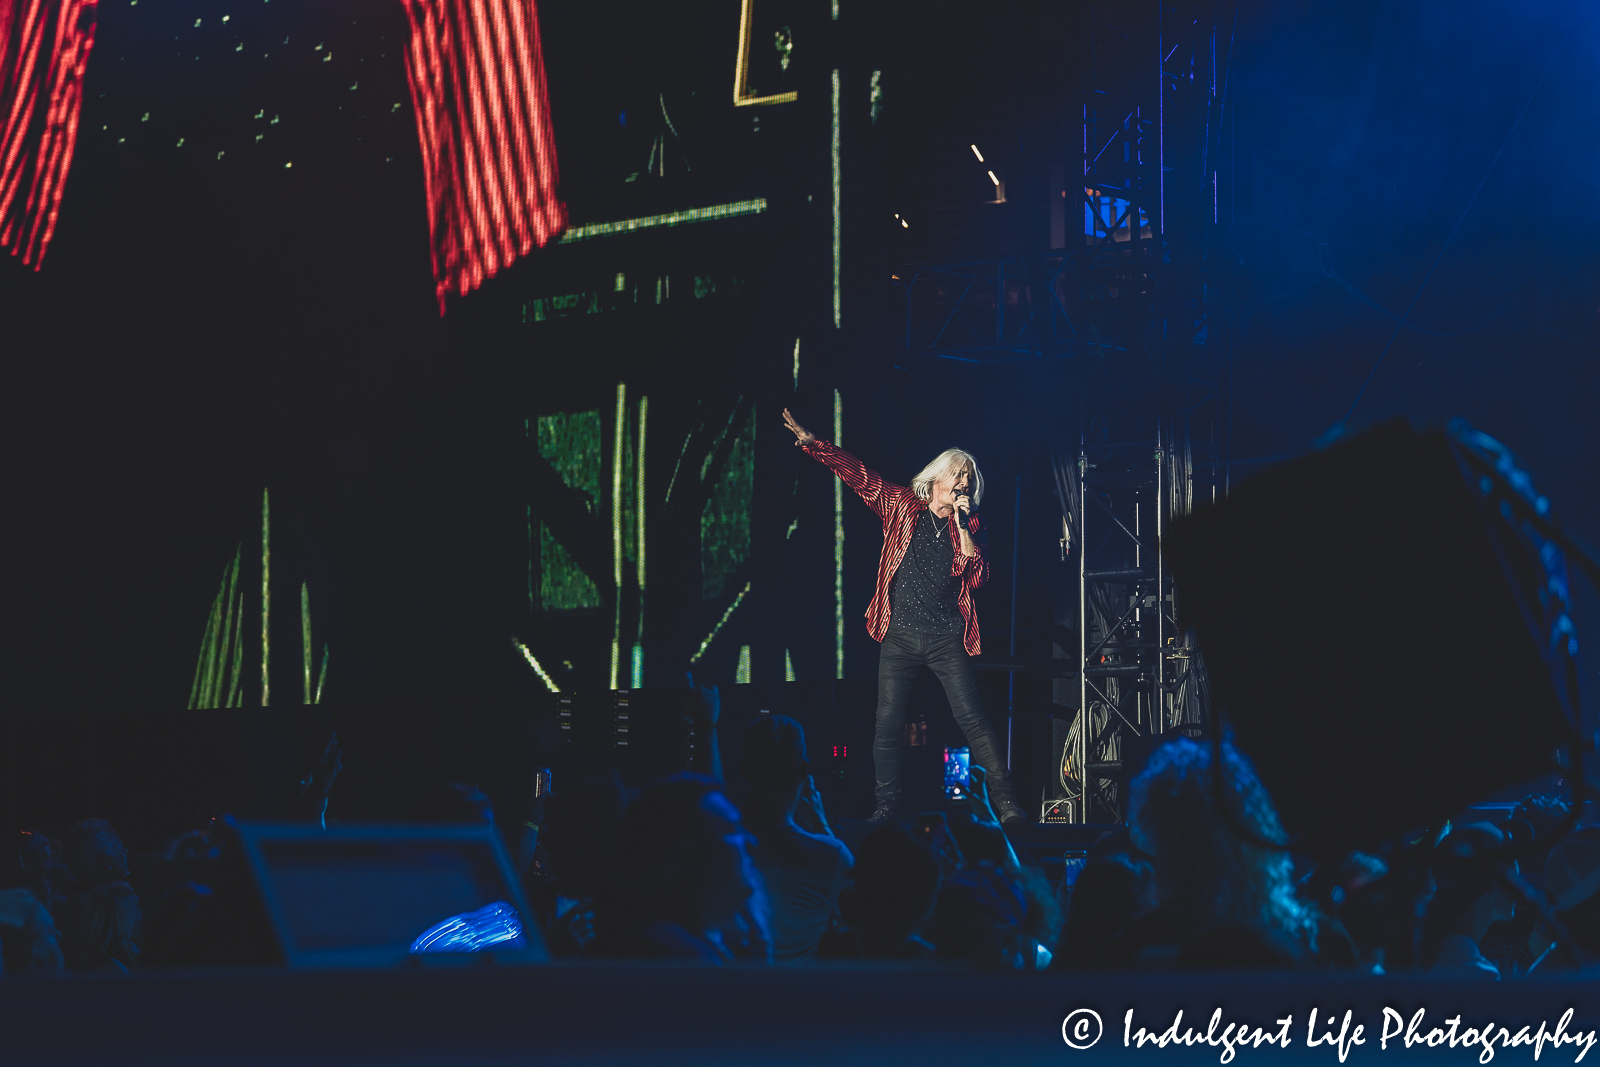 Frontman Joe Elliot of Def Leppard live in concert during the stadium tour stop at Kauffman Stadium in Kansas City, MO on July 19, 2022.